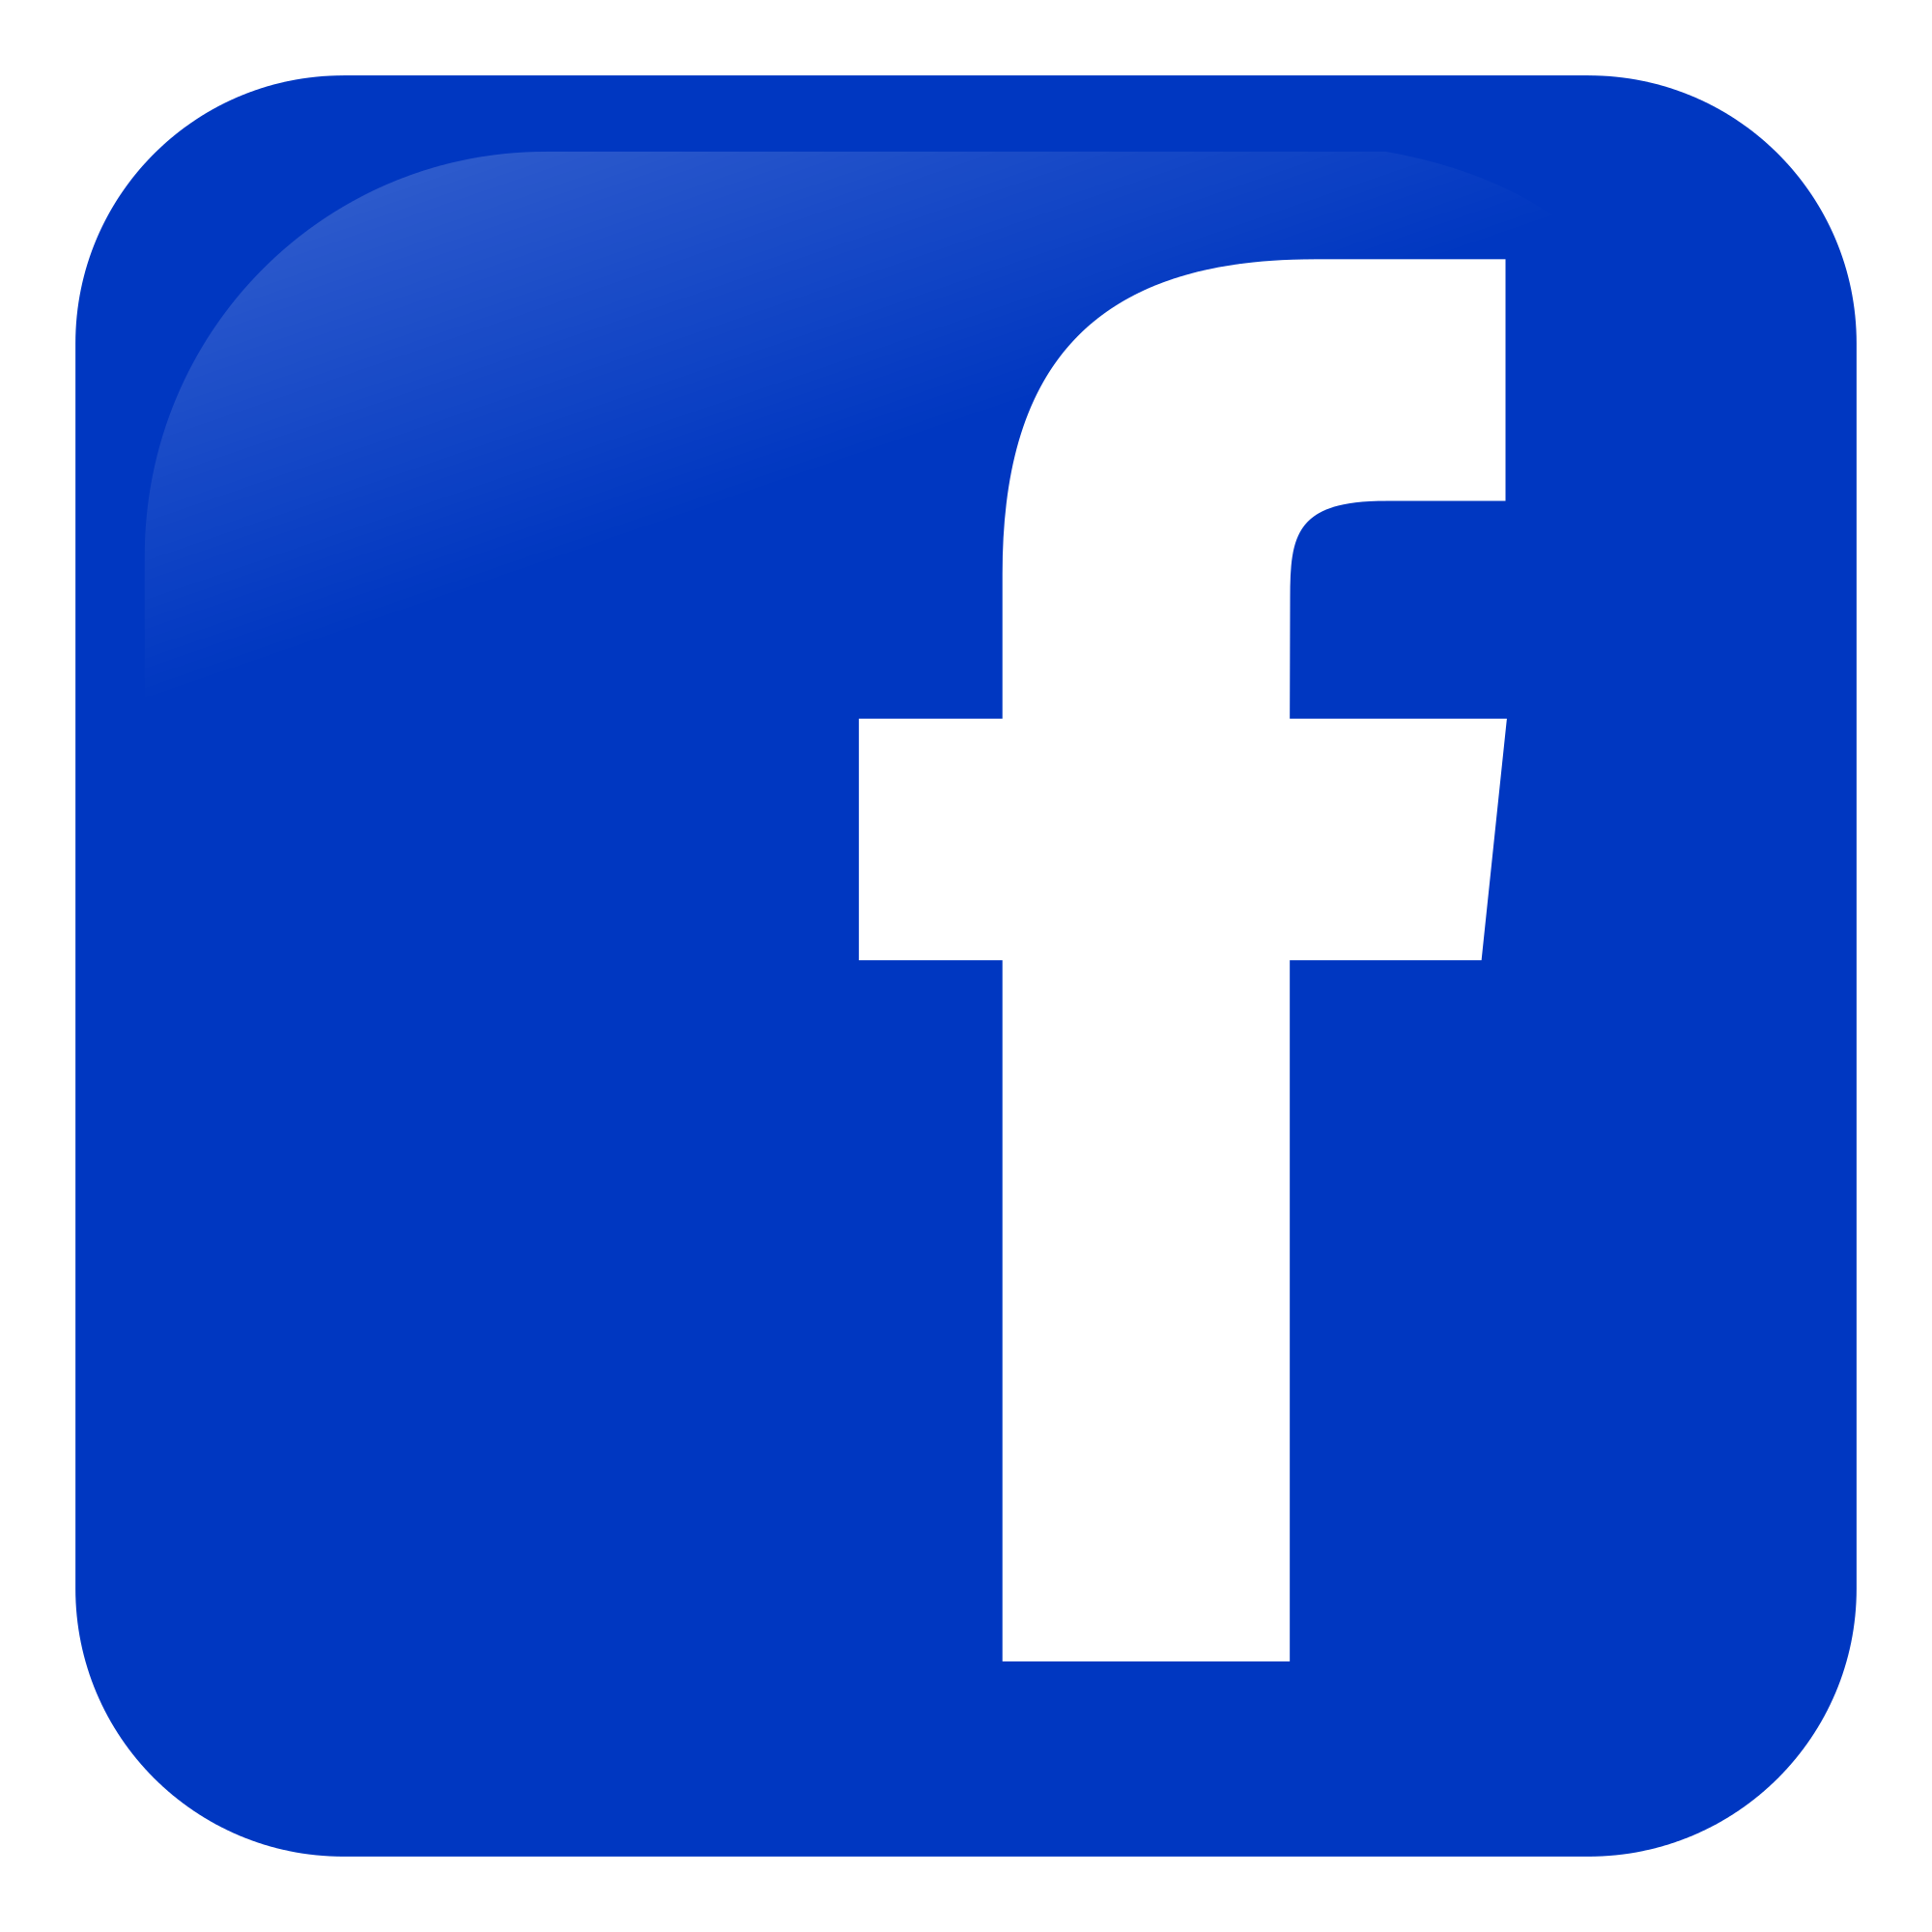 Visit us on Facebook - click here!